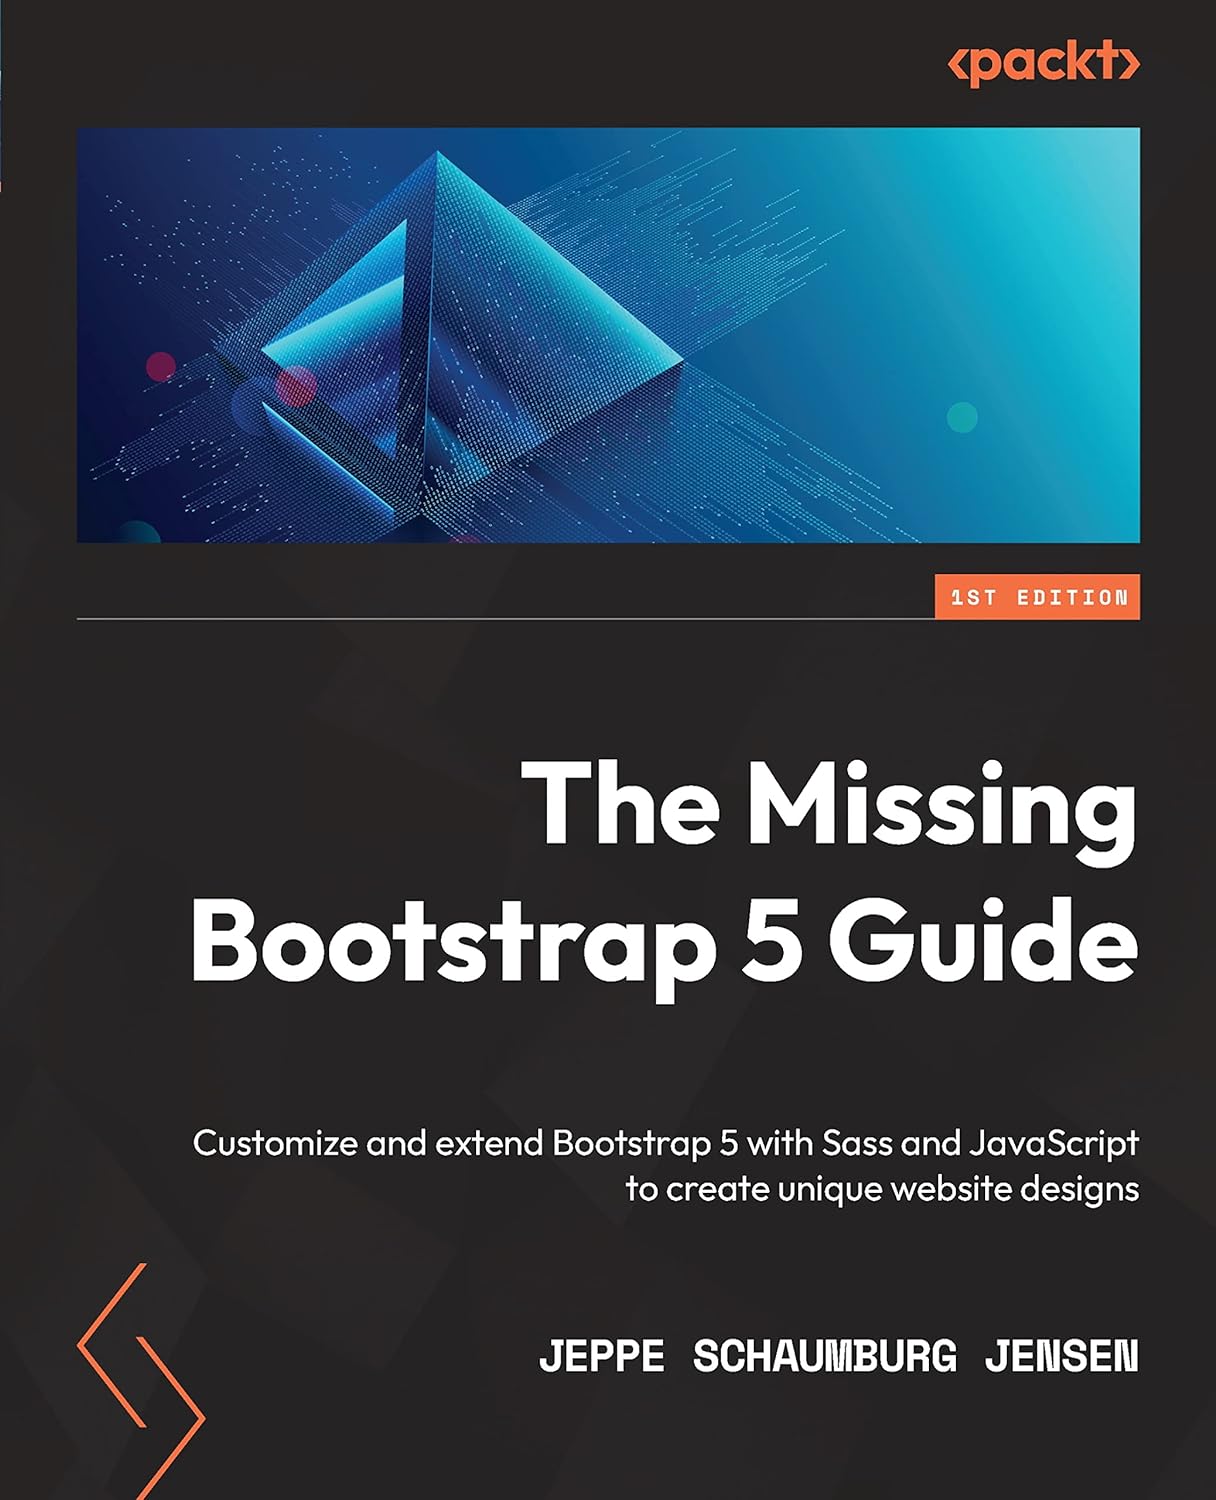 The Missing Bootstrap 5 Guide: Customize and extend Bootstrap 5 with Sass and JavaScript to create unique website designs by  Jeppe Schaumburg Jensen